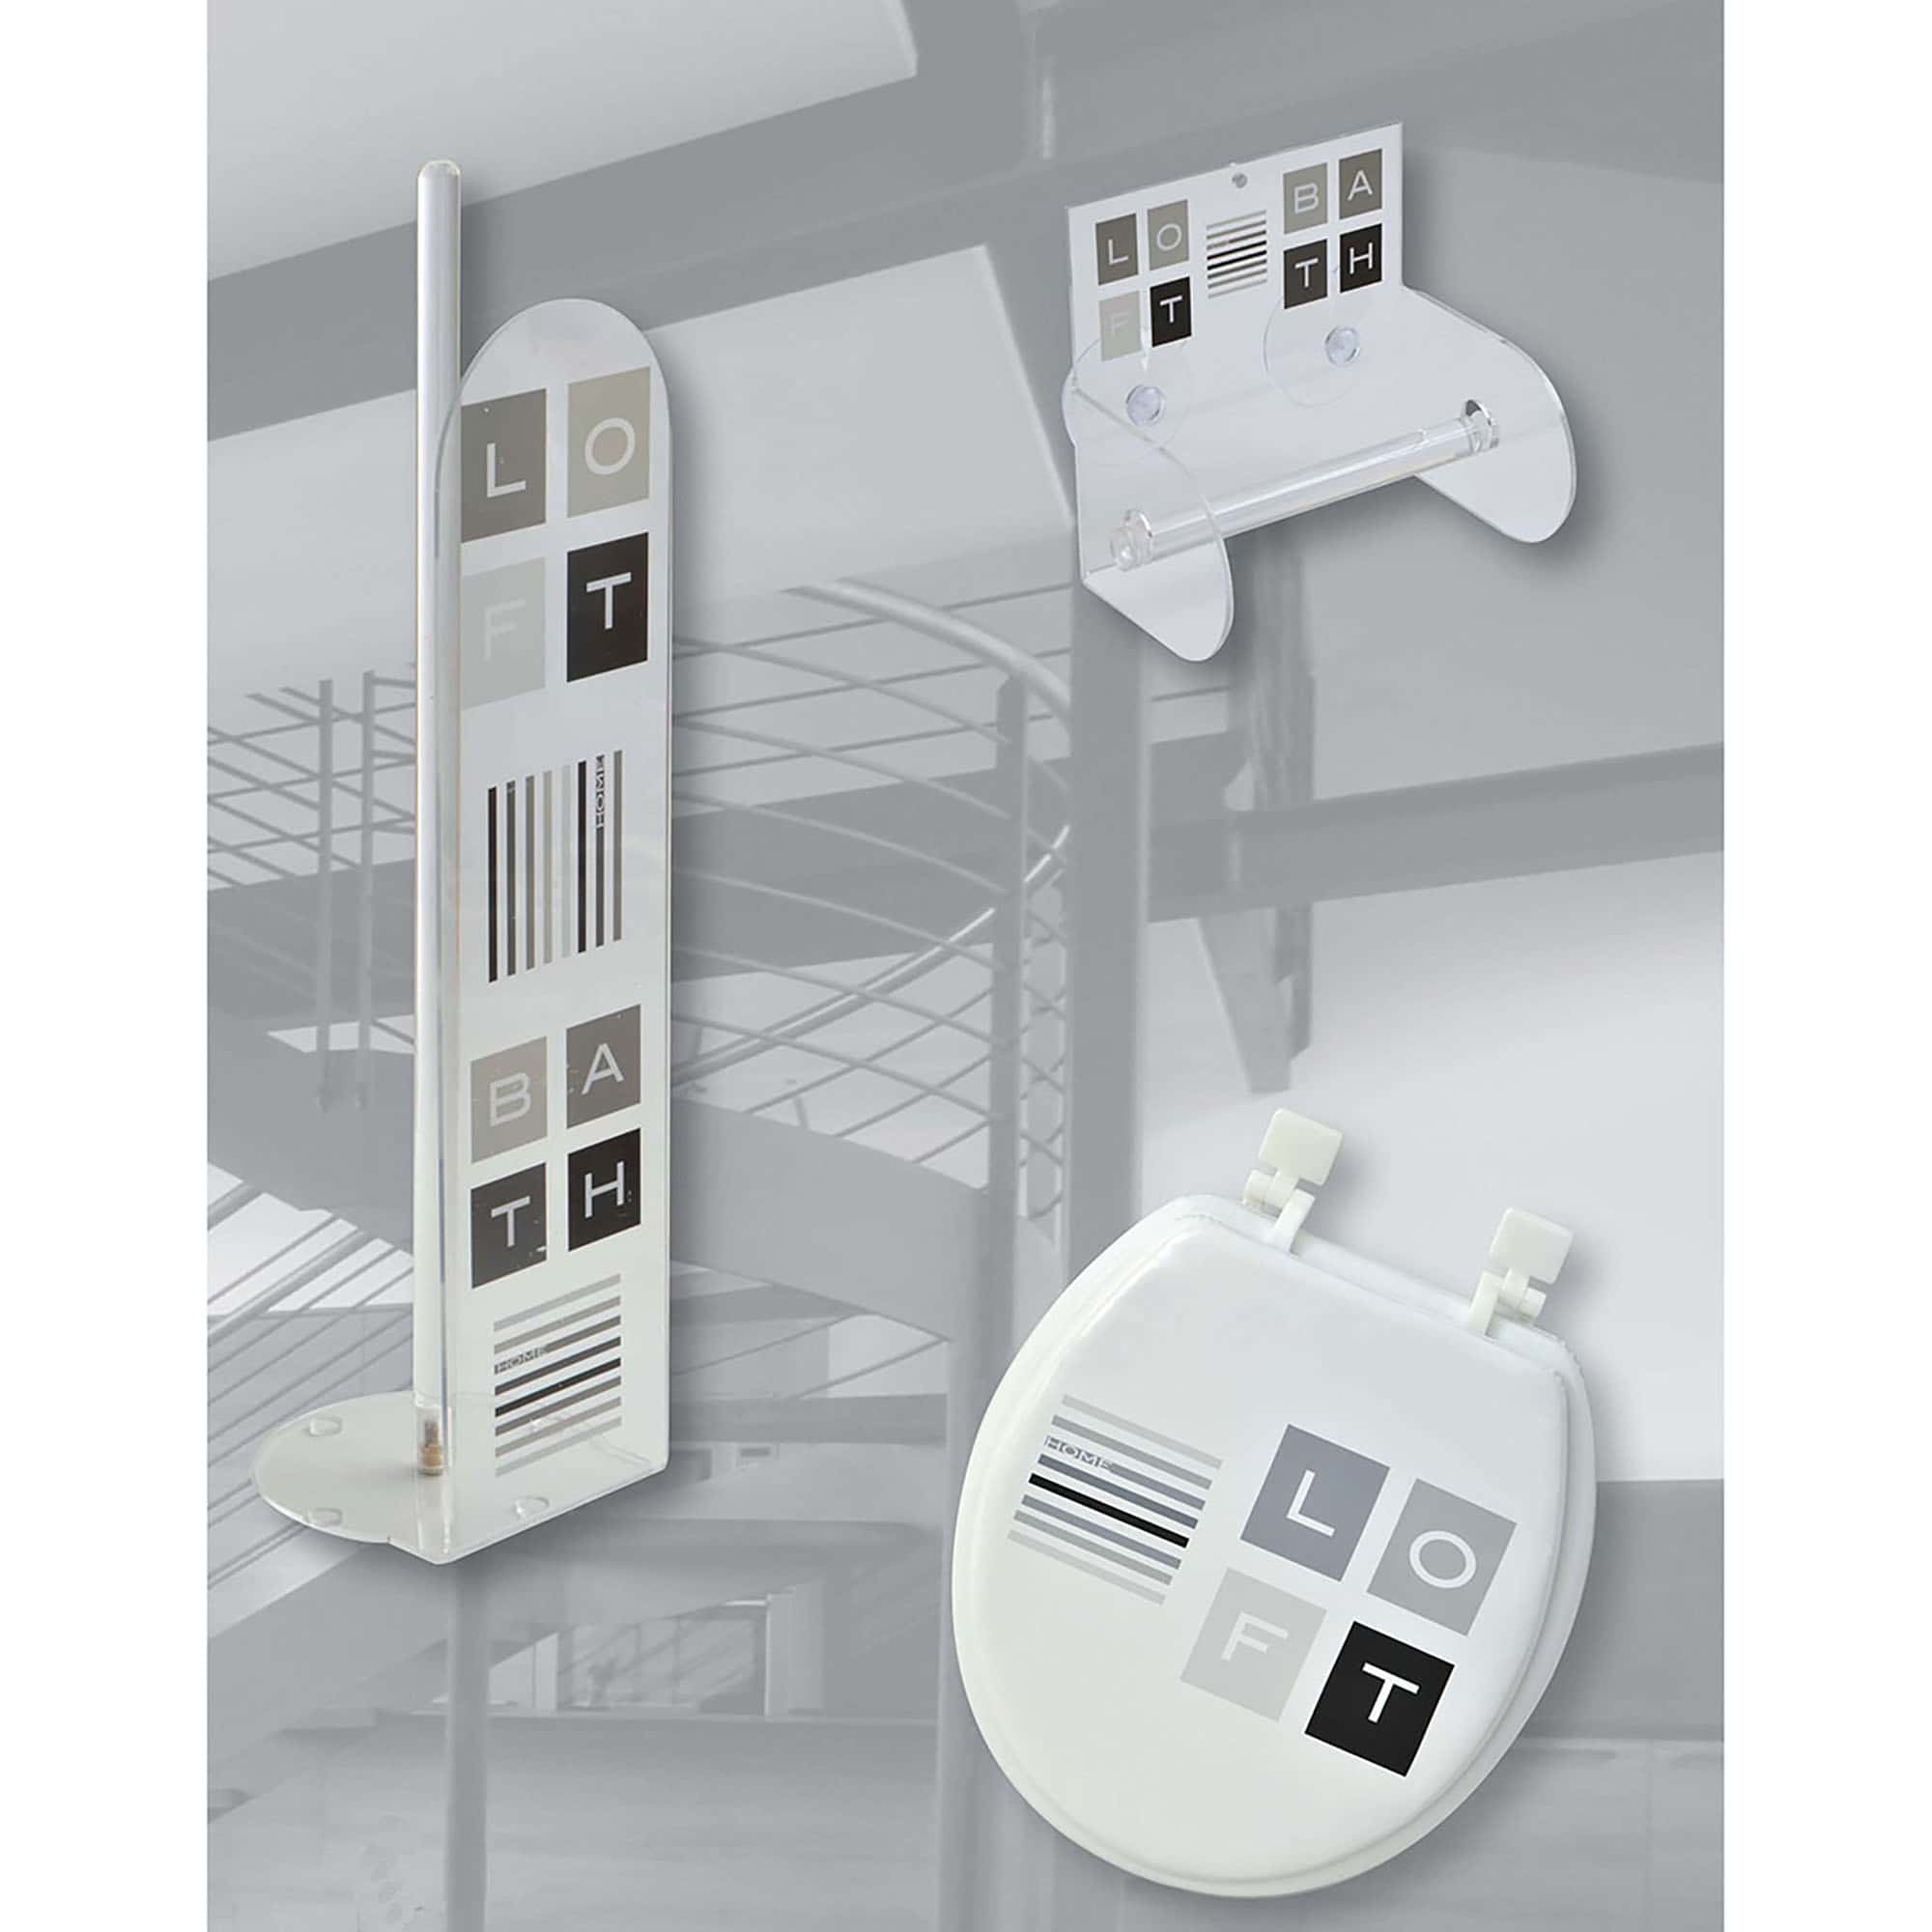 Modern 'LOFT BATH' toilet paper holder displayed between a washer and dryer in a laundry room setting